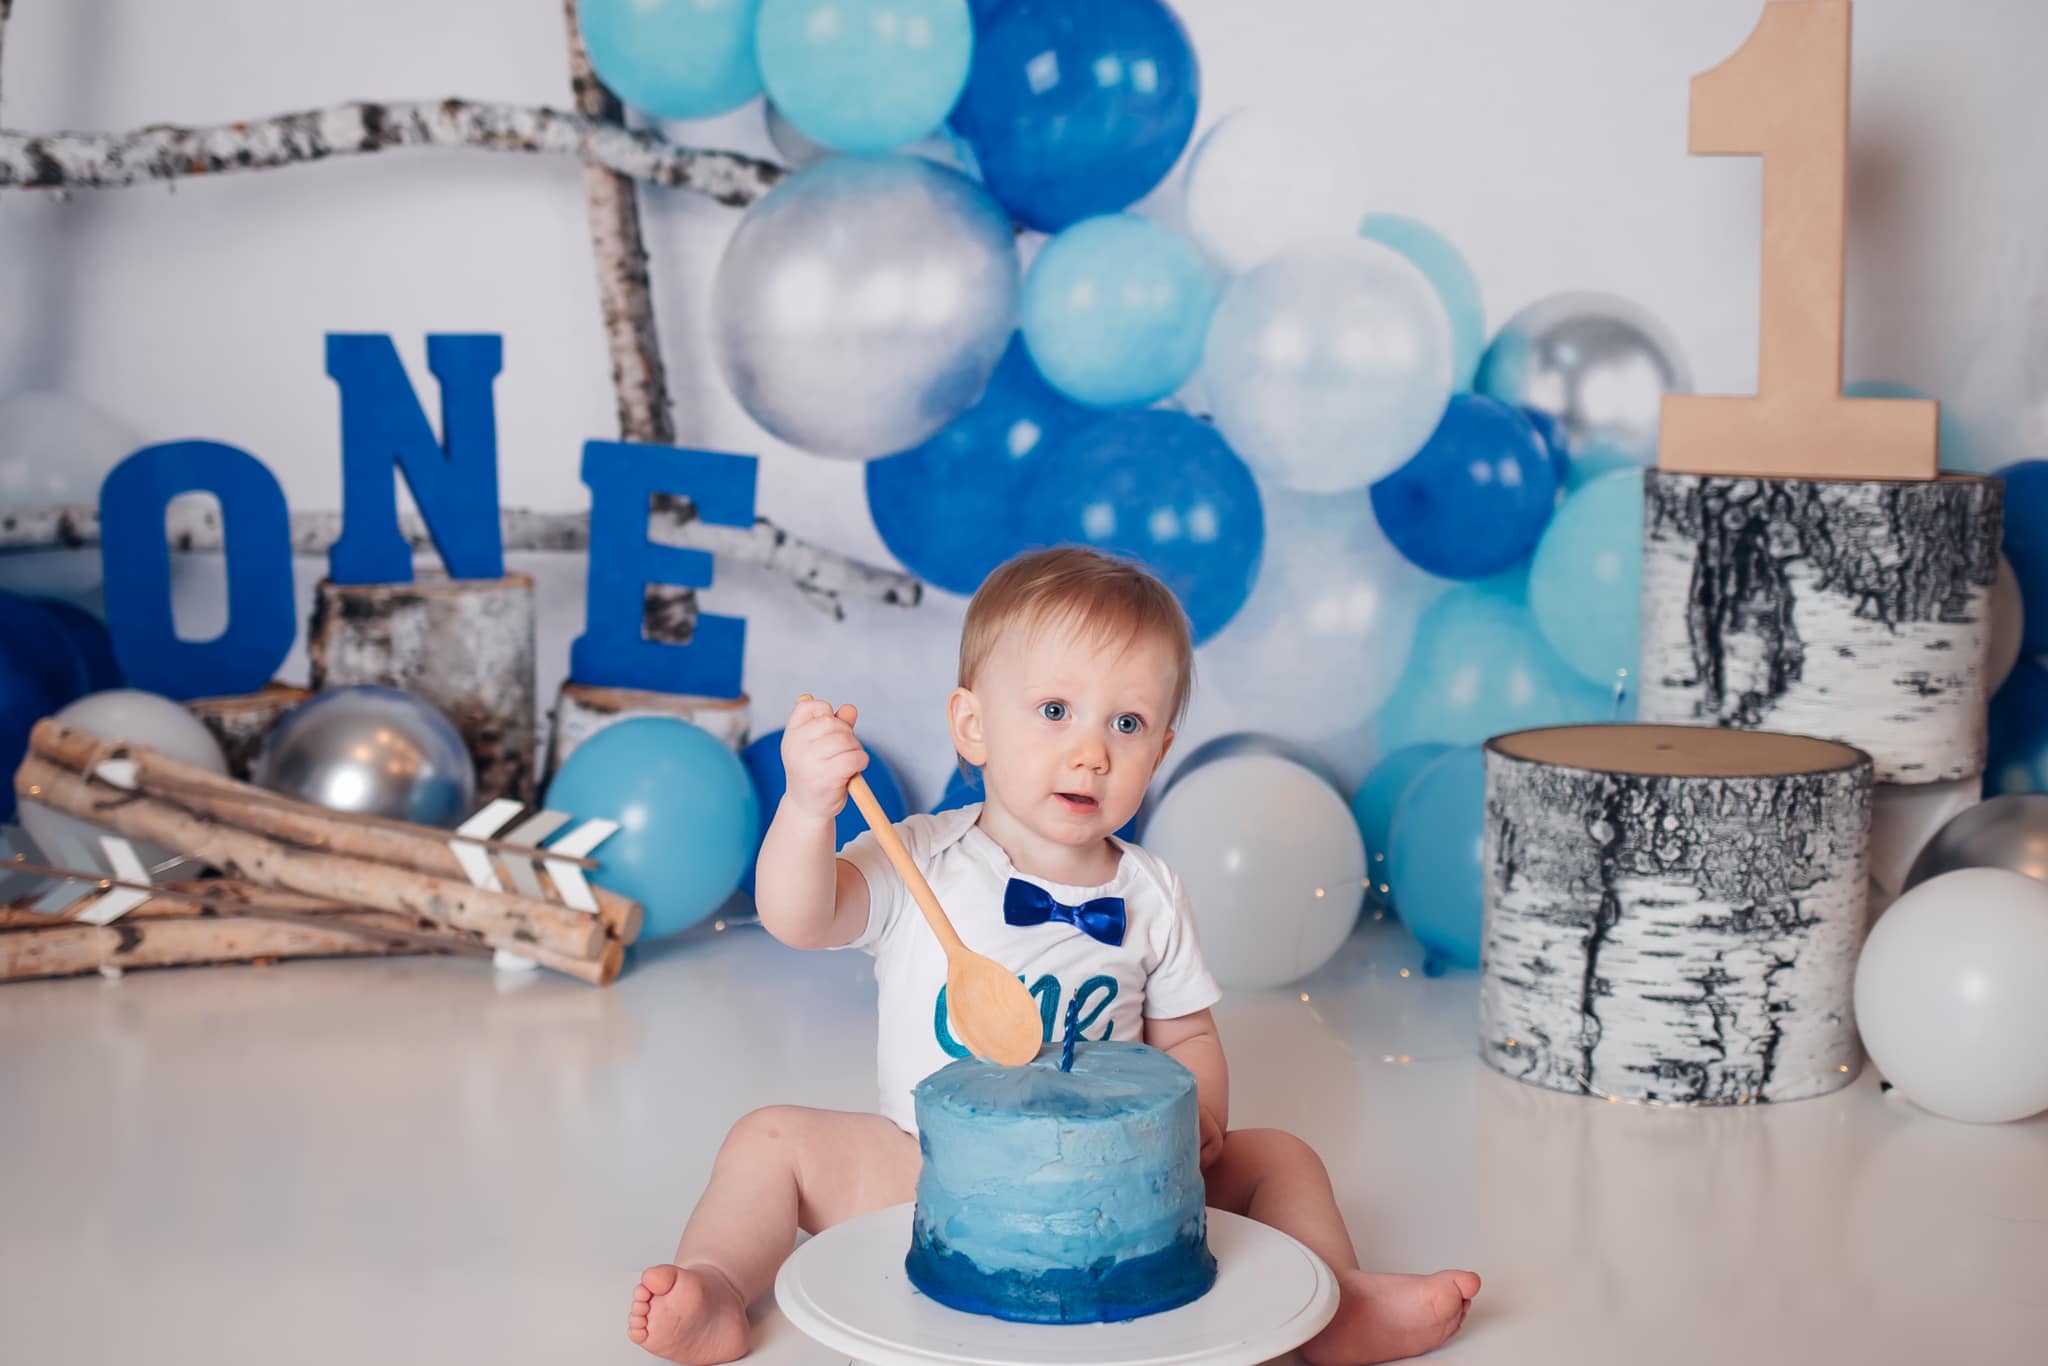 Kate 7x5ft Birchy Blue Balloons First Birthday Backdrop Designed by Arica Kirby (only ship to Canada)